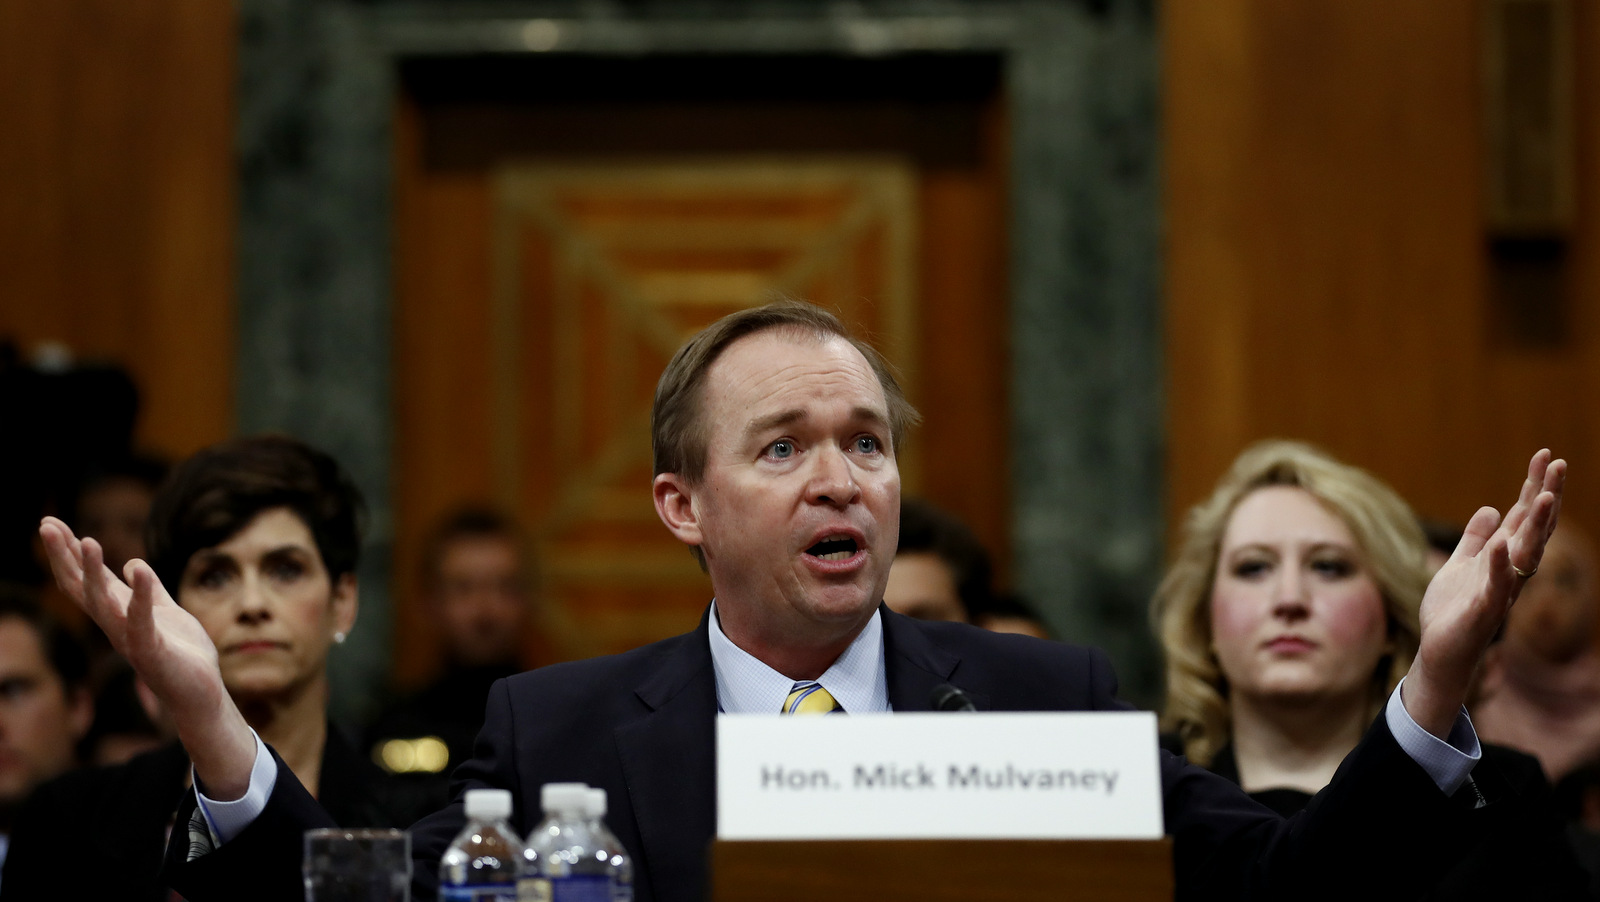 Trump's Budget Director-designate Rep. Mick Mulvaney, R-S.C., testifies on Capitol Hill in Washington, Tuesday, Jan. 24, 2017, at his confirmation hearing before the Senate Budget Committee. (AP/Carolyn Kaster)